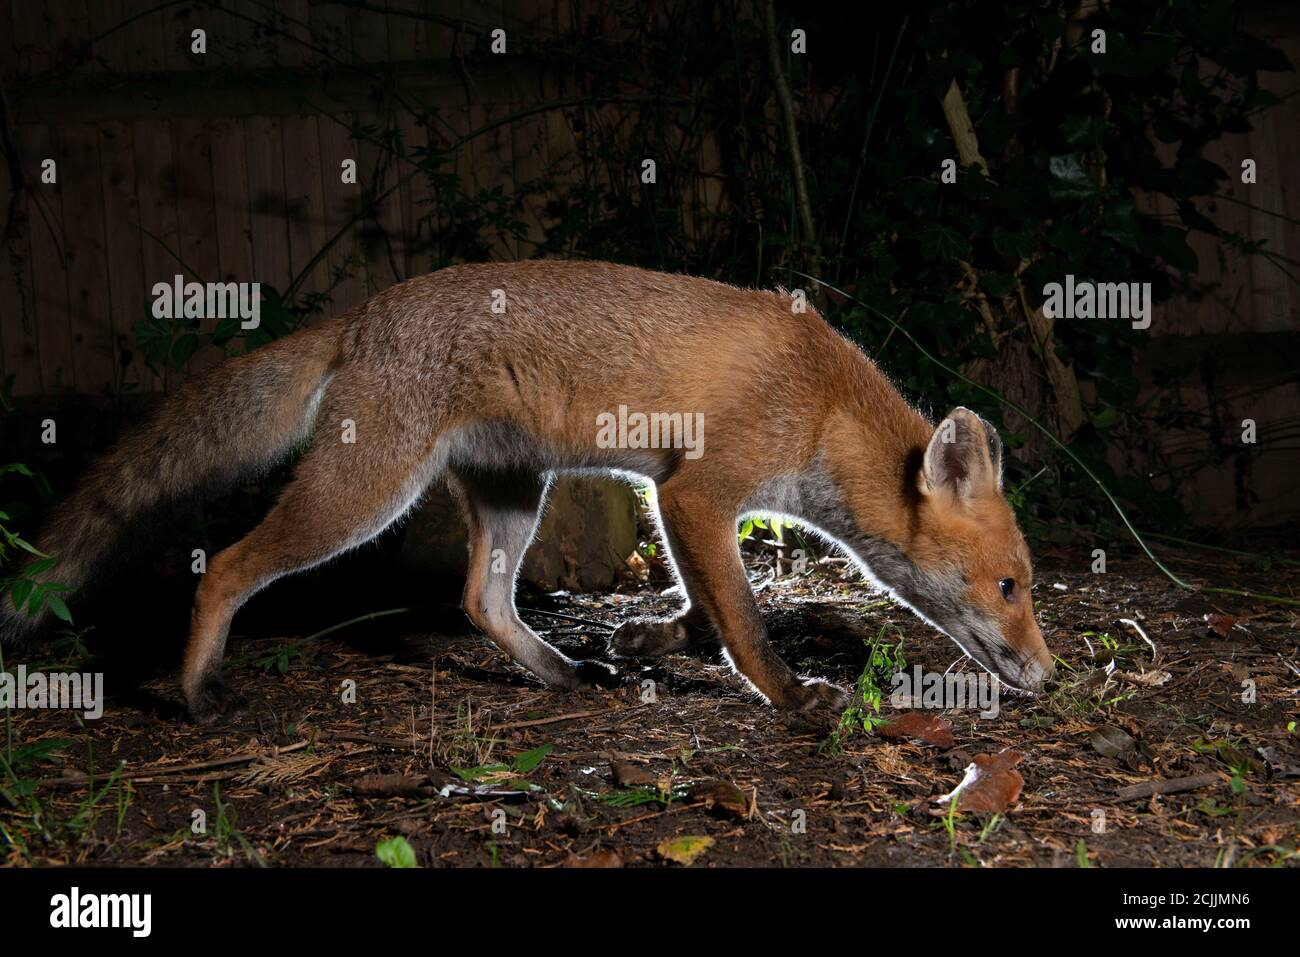 Fox at night sniffing the ground with rim light Stock Photo